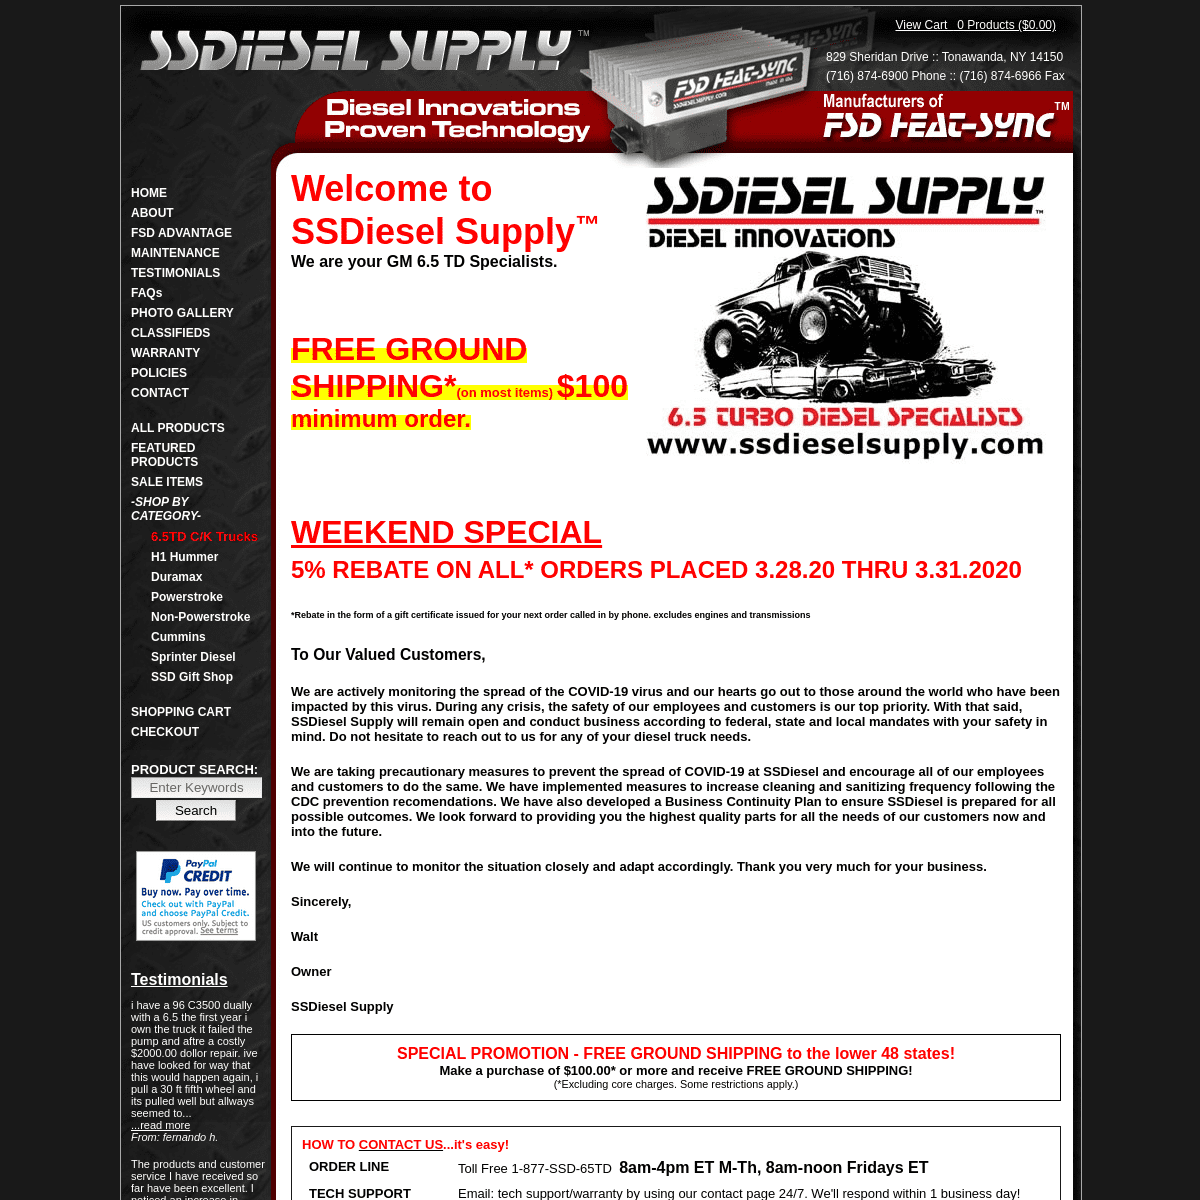 A complete backup of ssdieselsupply.com